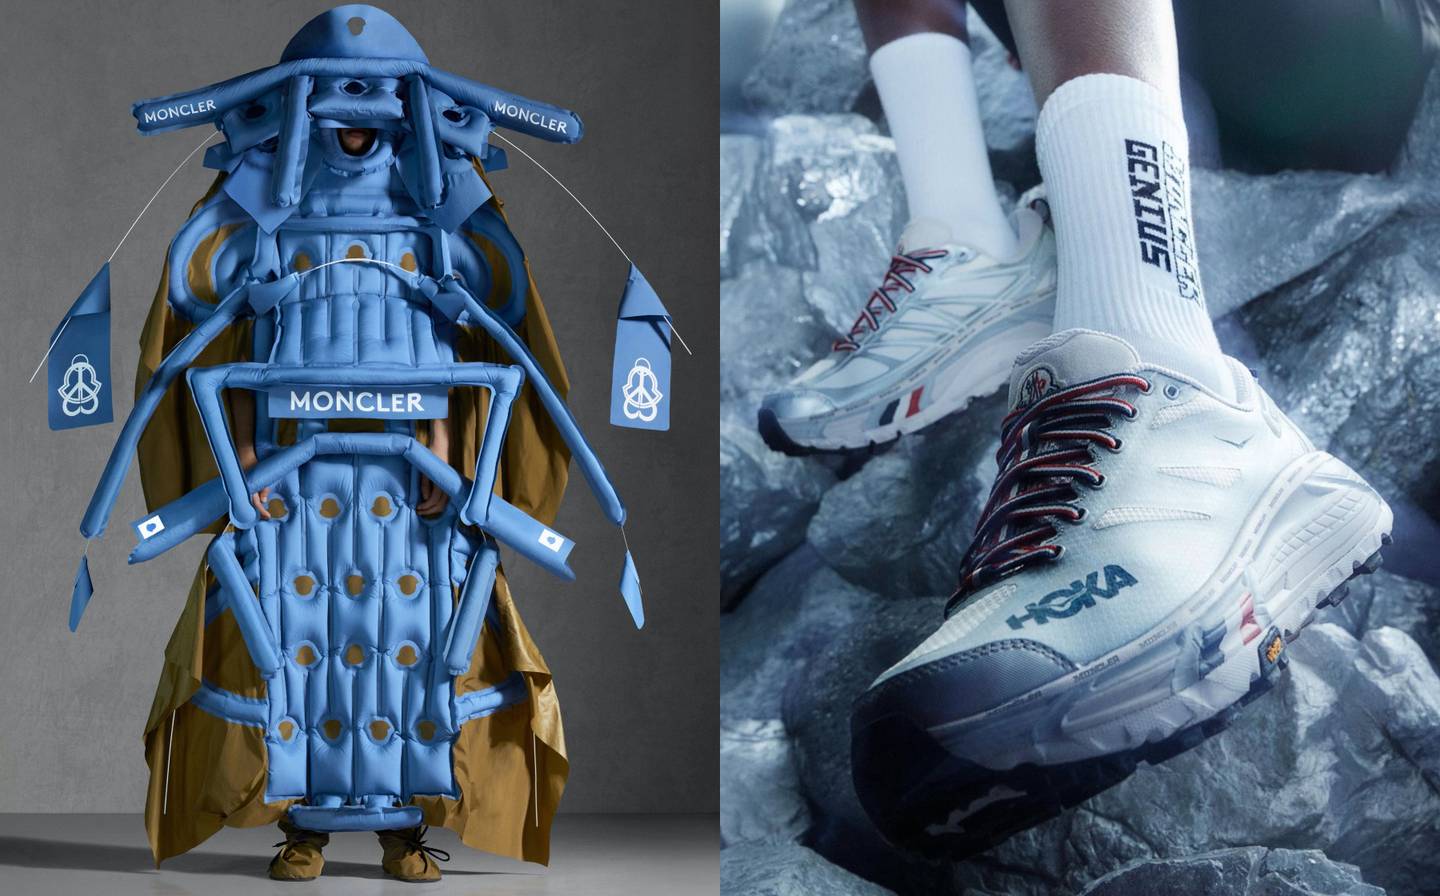 Moncler is re-tooling its program of Genius collabs to focus on Gen-Z consumers. A recent drop with shoe brand Hoka may already reflect the shift to a more relatable approach.